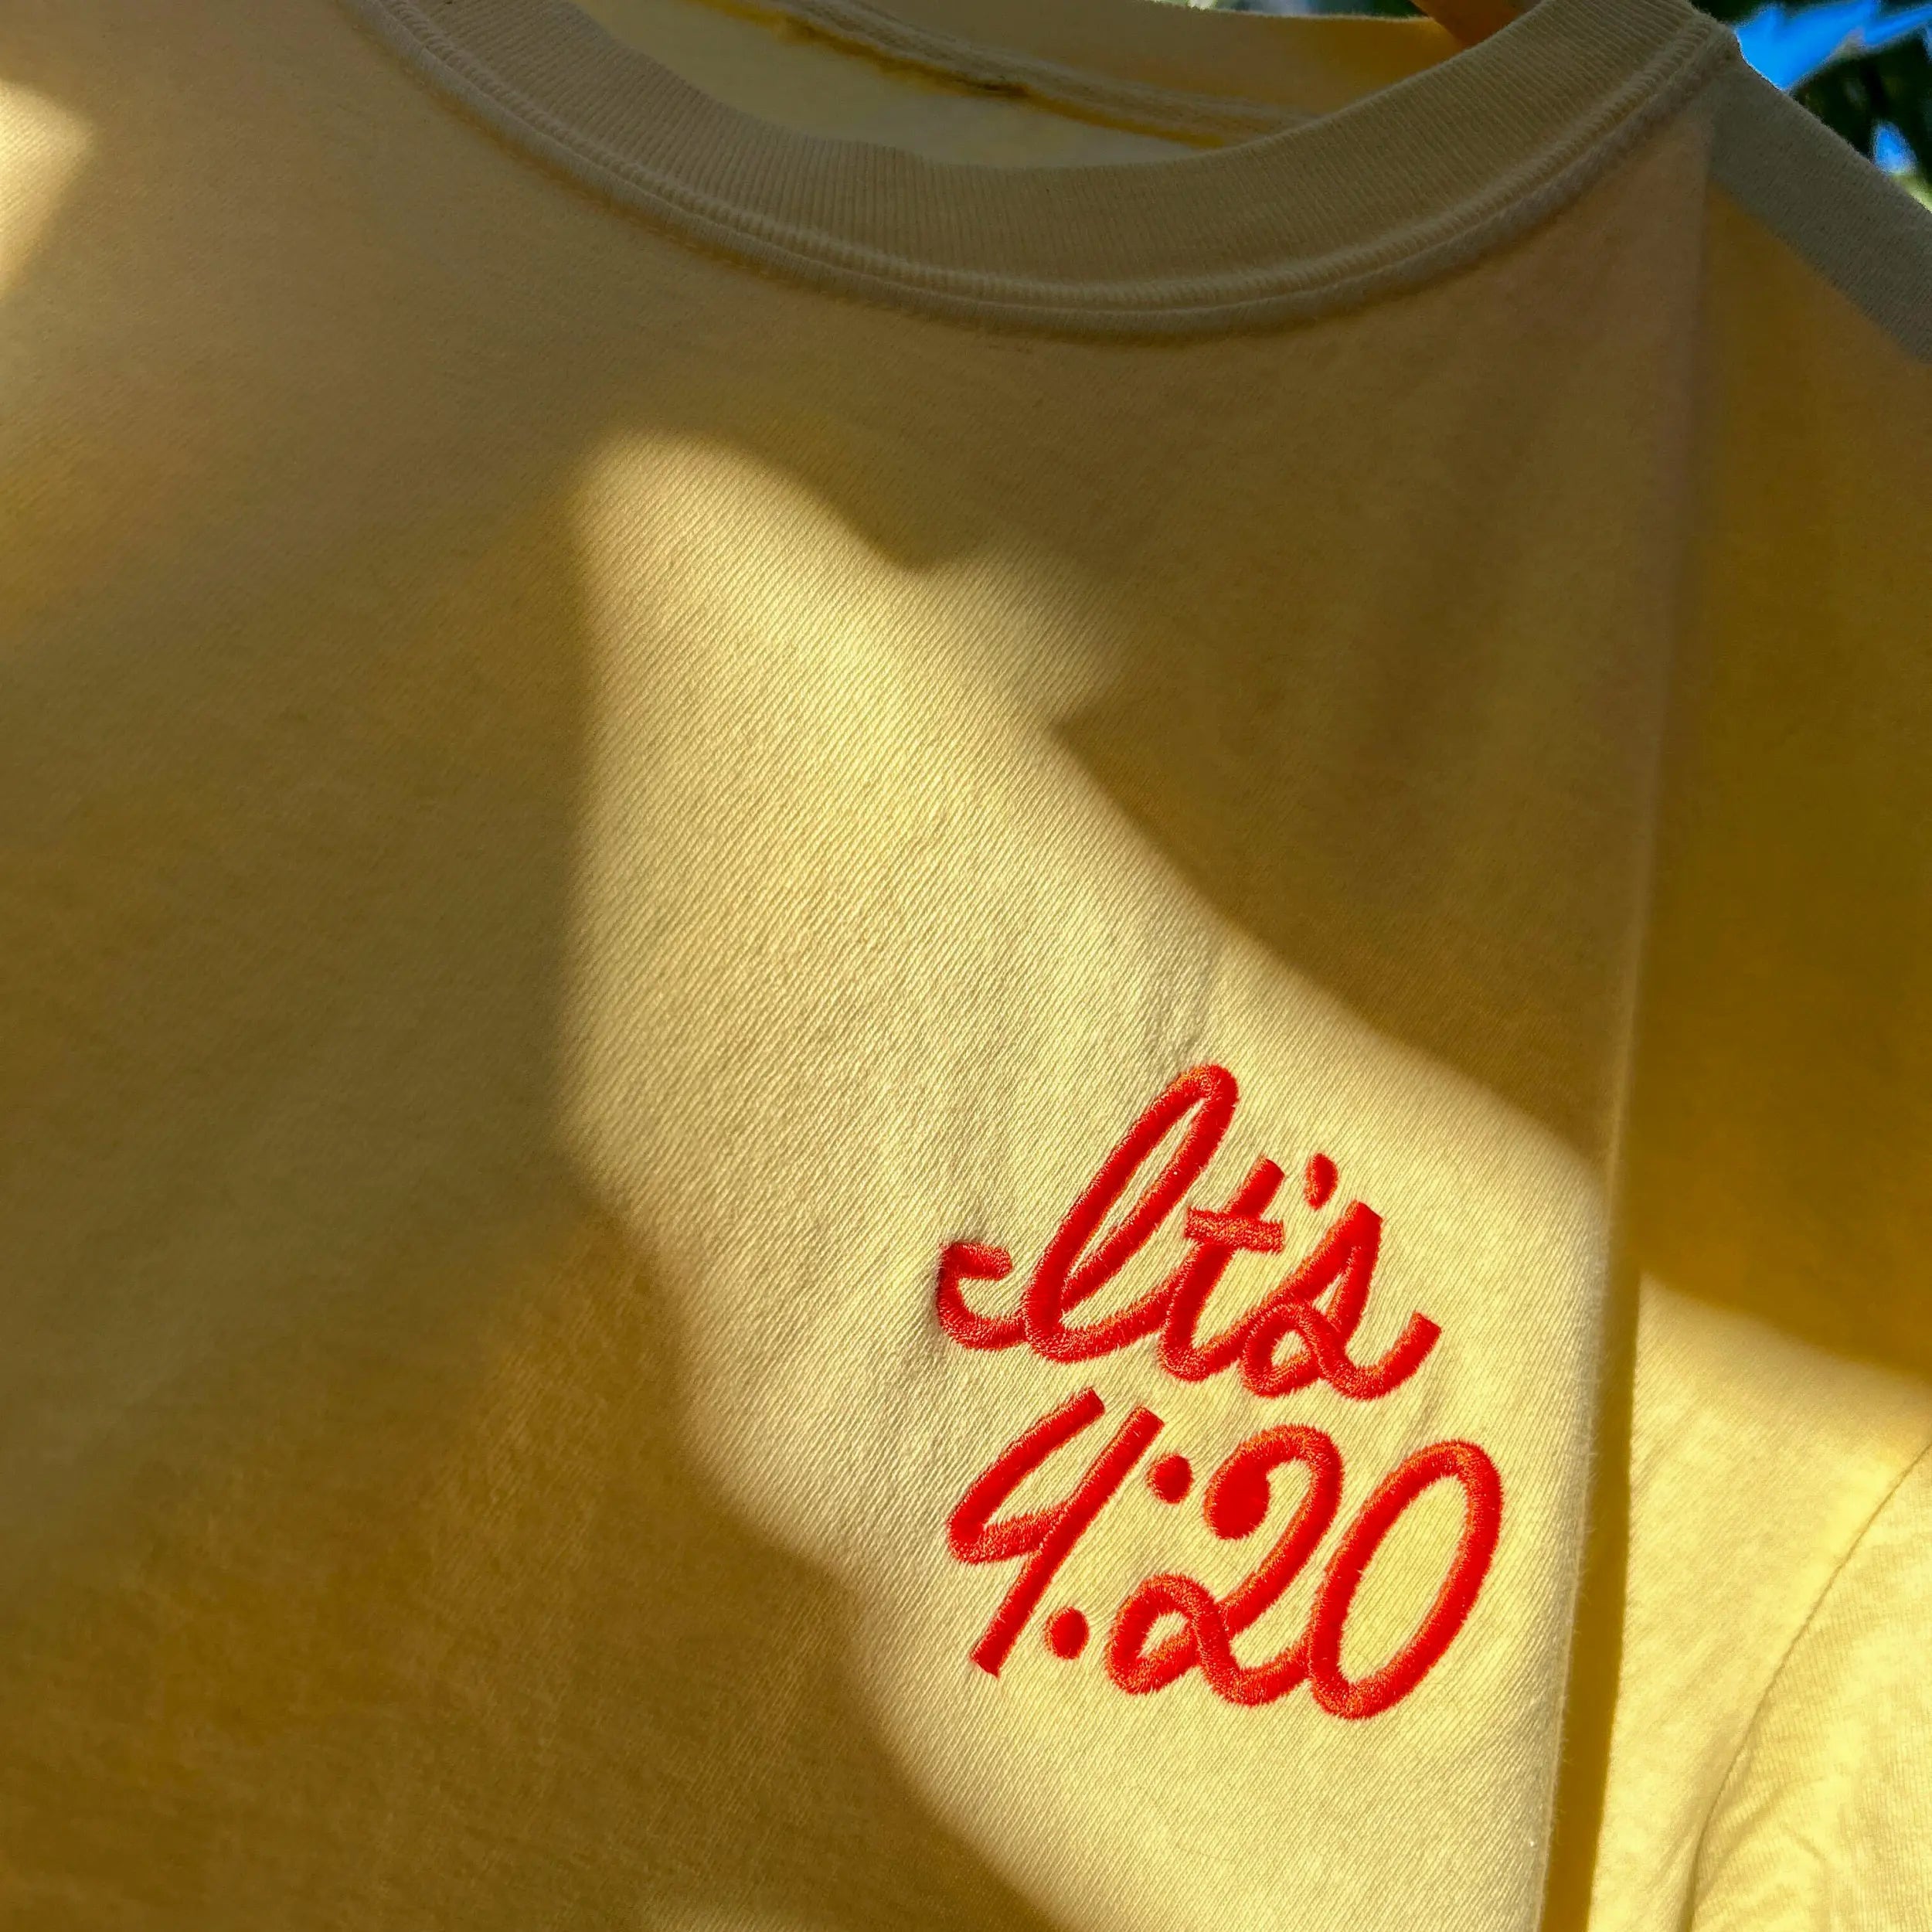 Celebrate 420 in style with this embroidered t-shirt